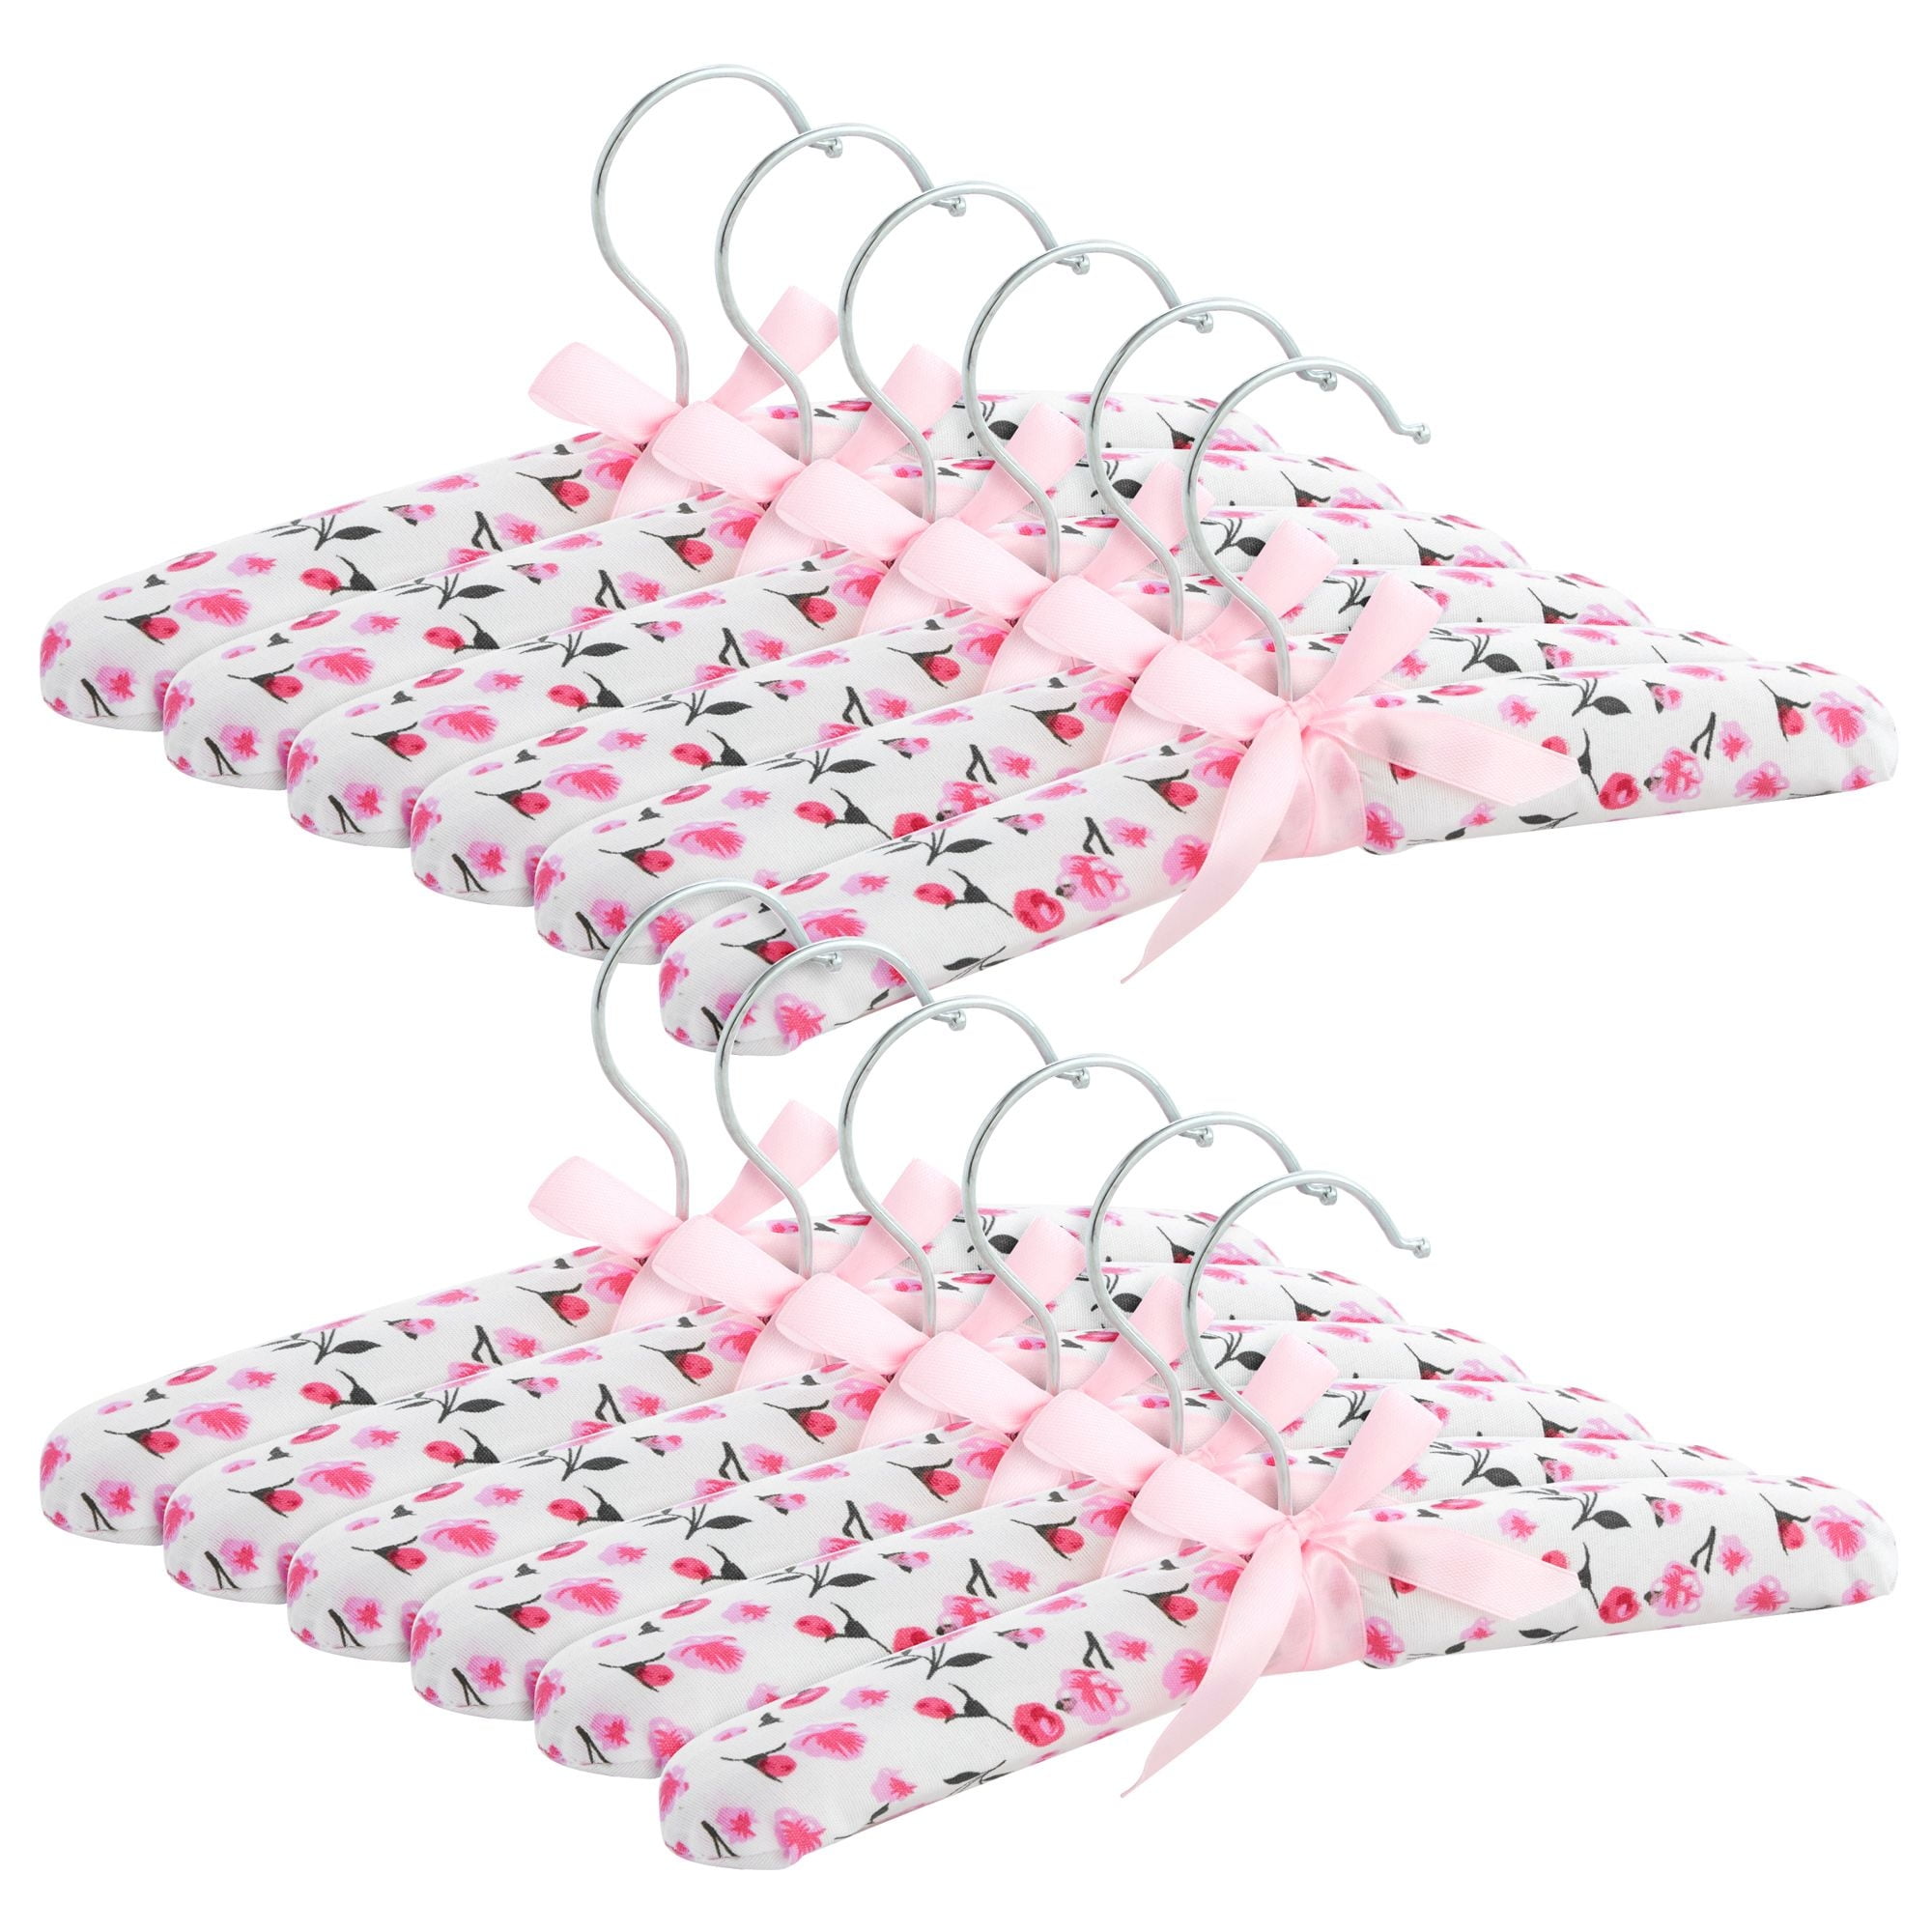 10 Satin Baby Hangers w/Clips (Pink)  Product & Reviews - Only Hangers –  Only Hangers Inc.